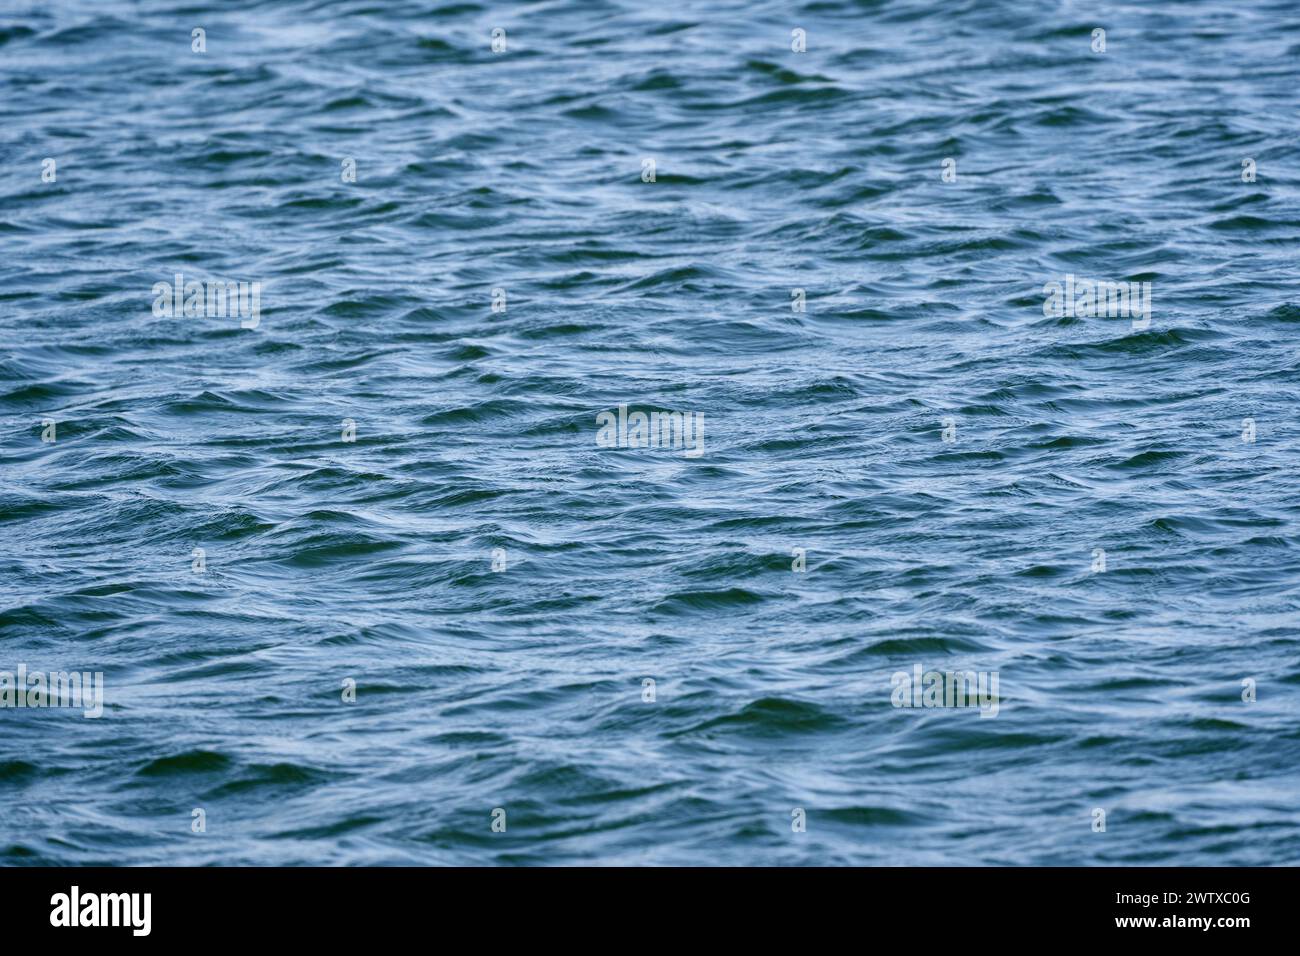 Waves on a lake in a sunny day in the spring Stock Photo